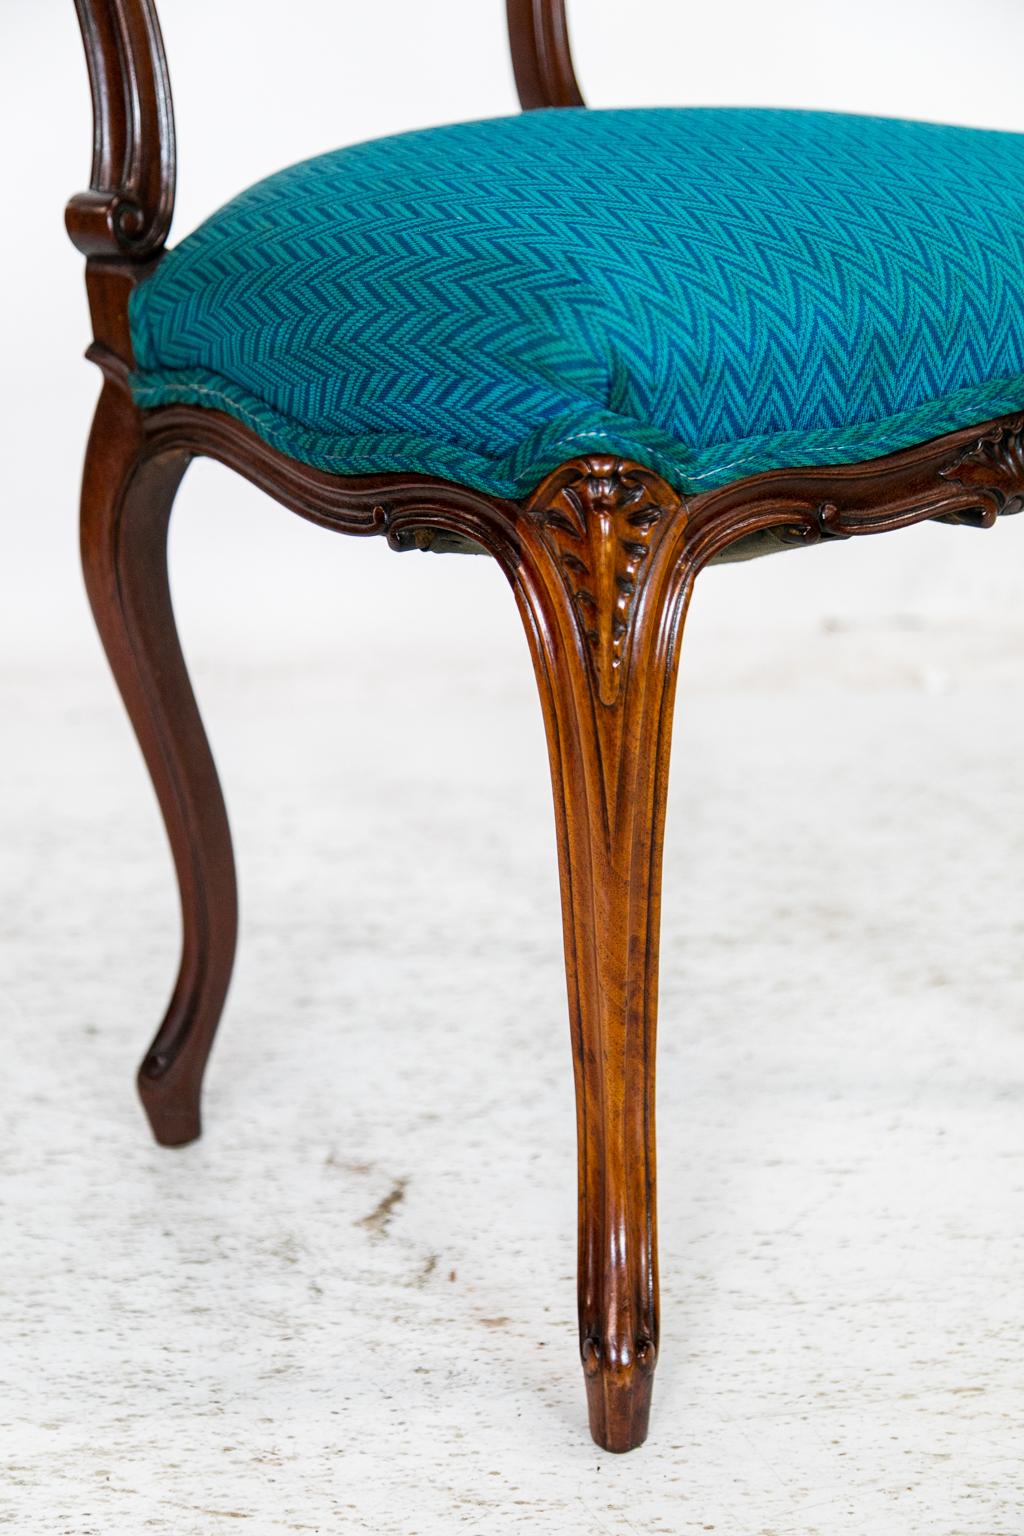 This French ladies desk chair is mahogany and is carved with leaf and floral designs with stylized scallop shells in the center of the back and front apron. It has been recently reupholstered in a teal fabric.